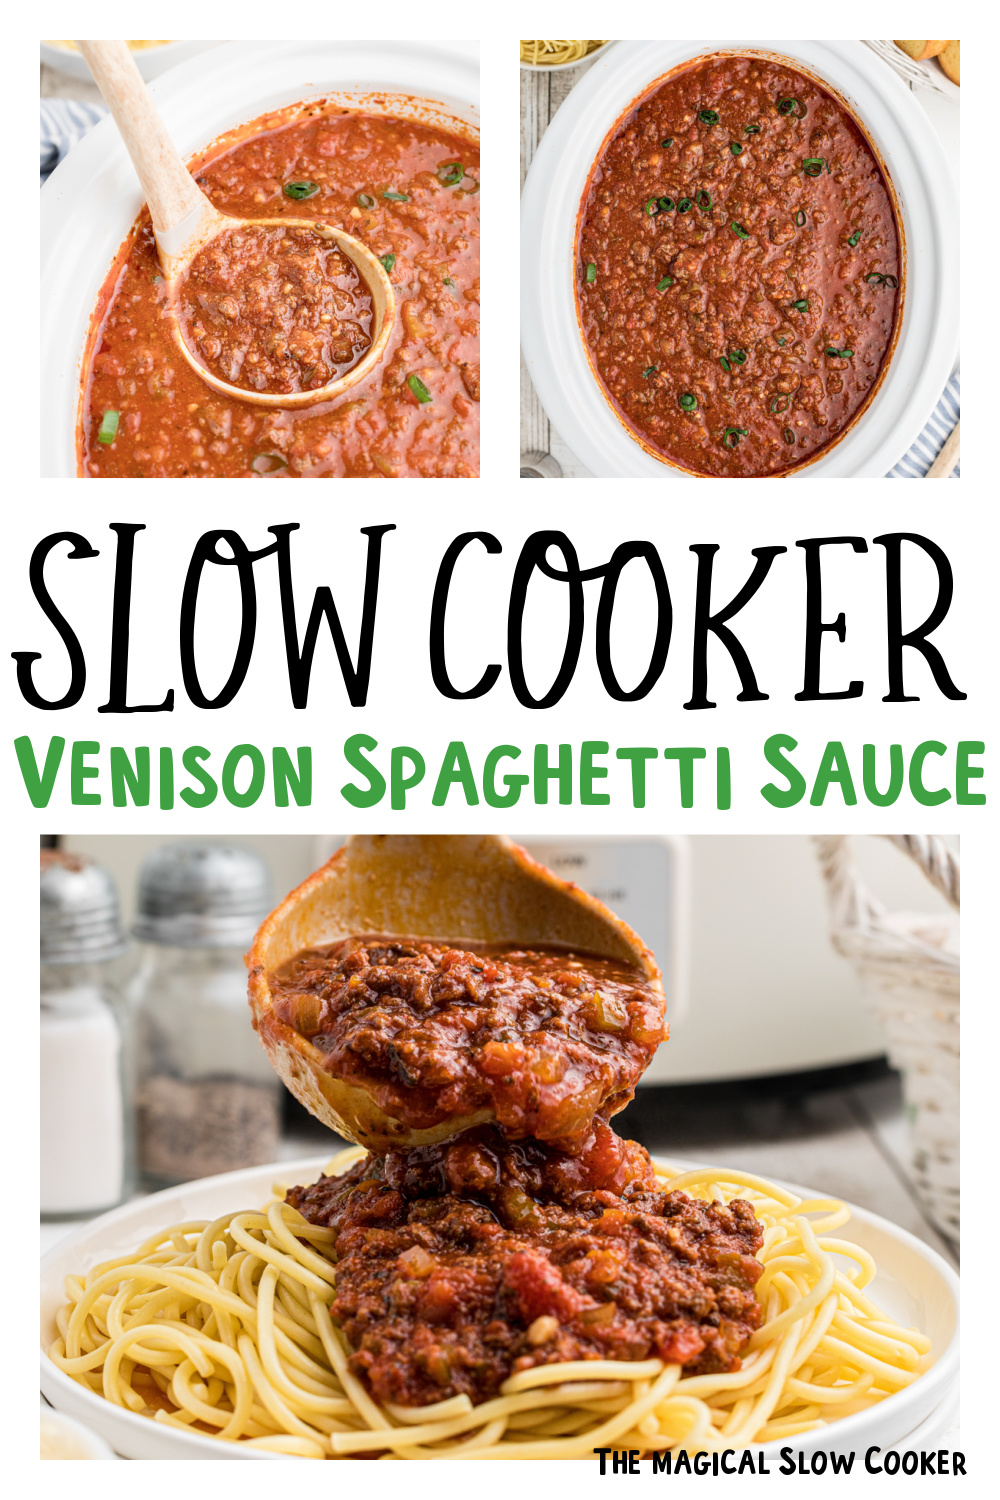 Slow Cooker Venison Spaghetti Sauce - The Magical Slow Cooker